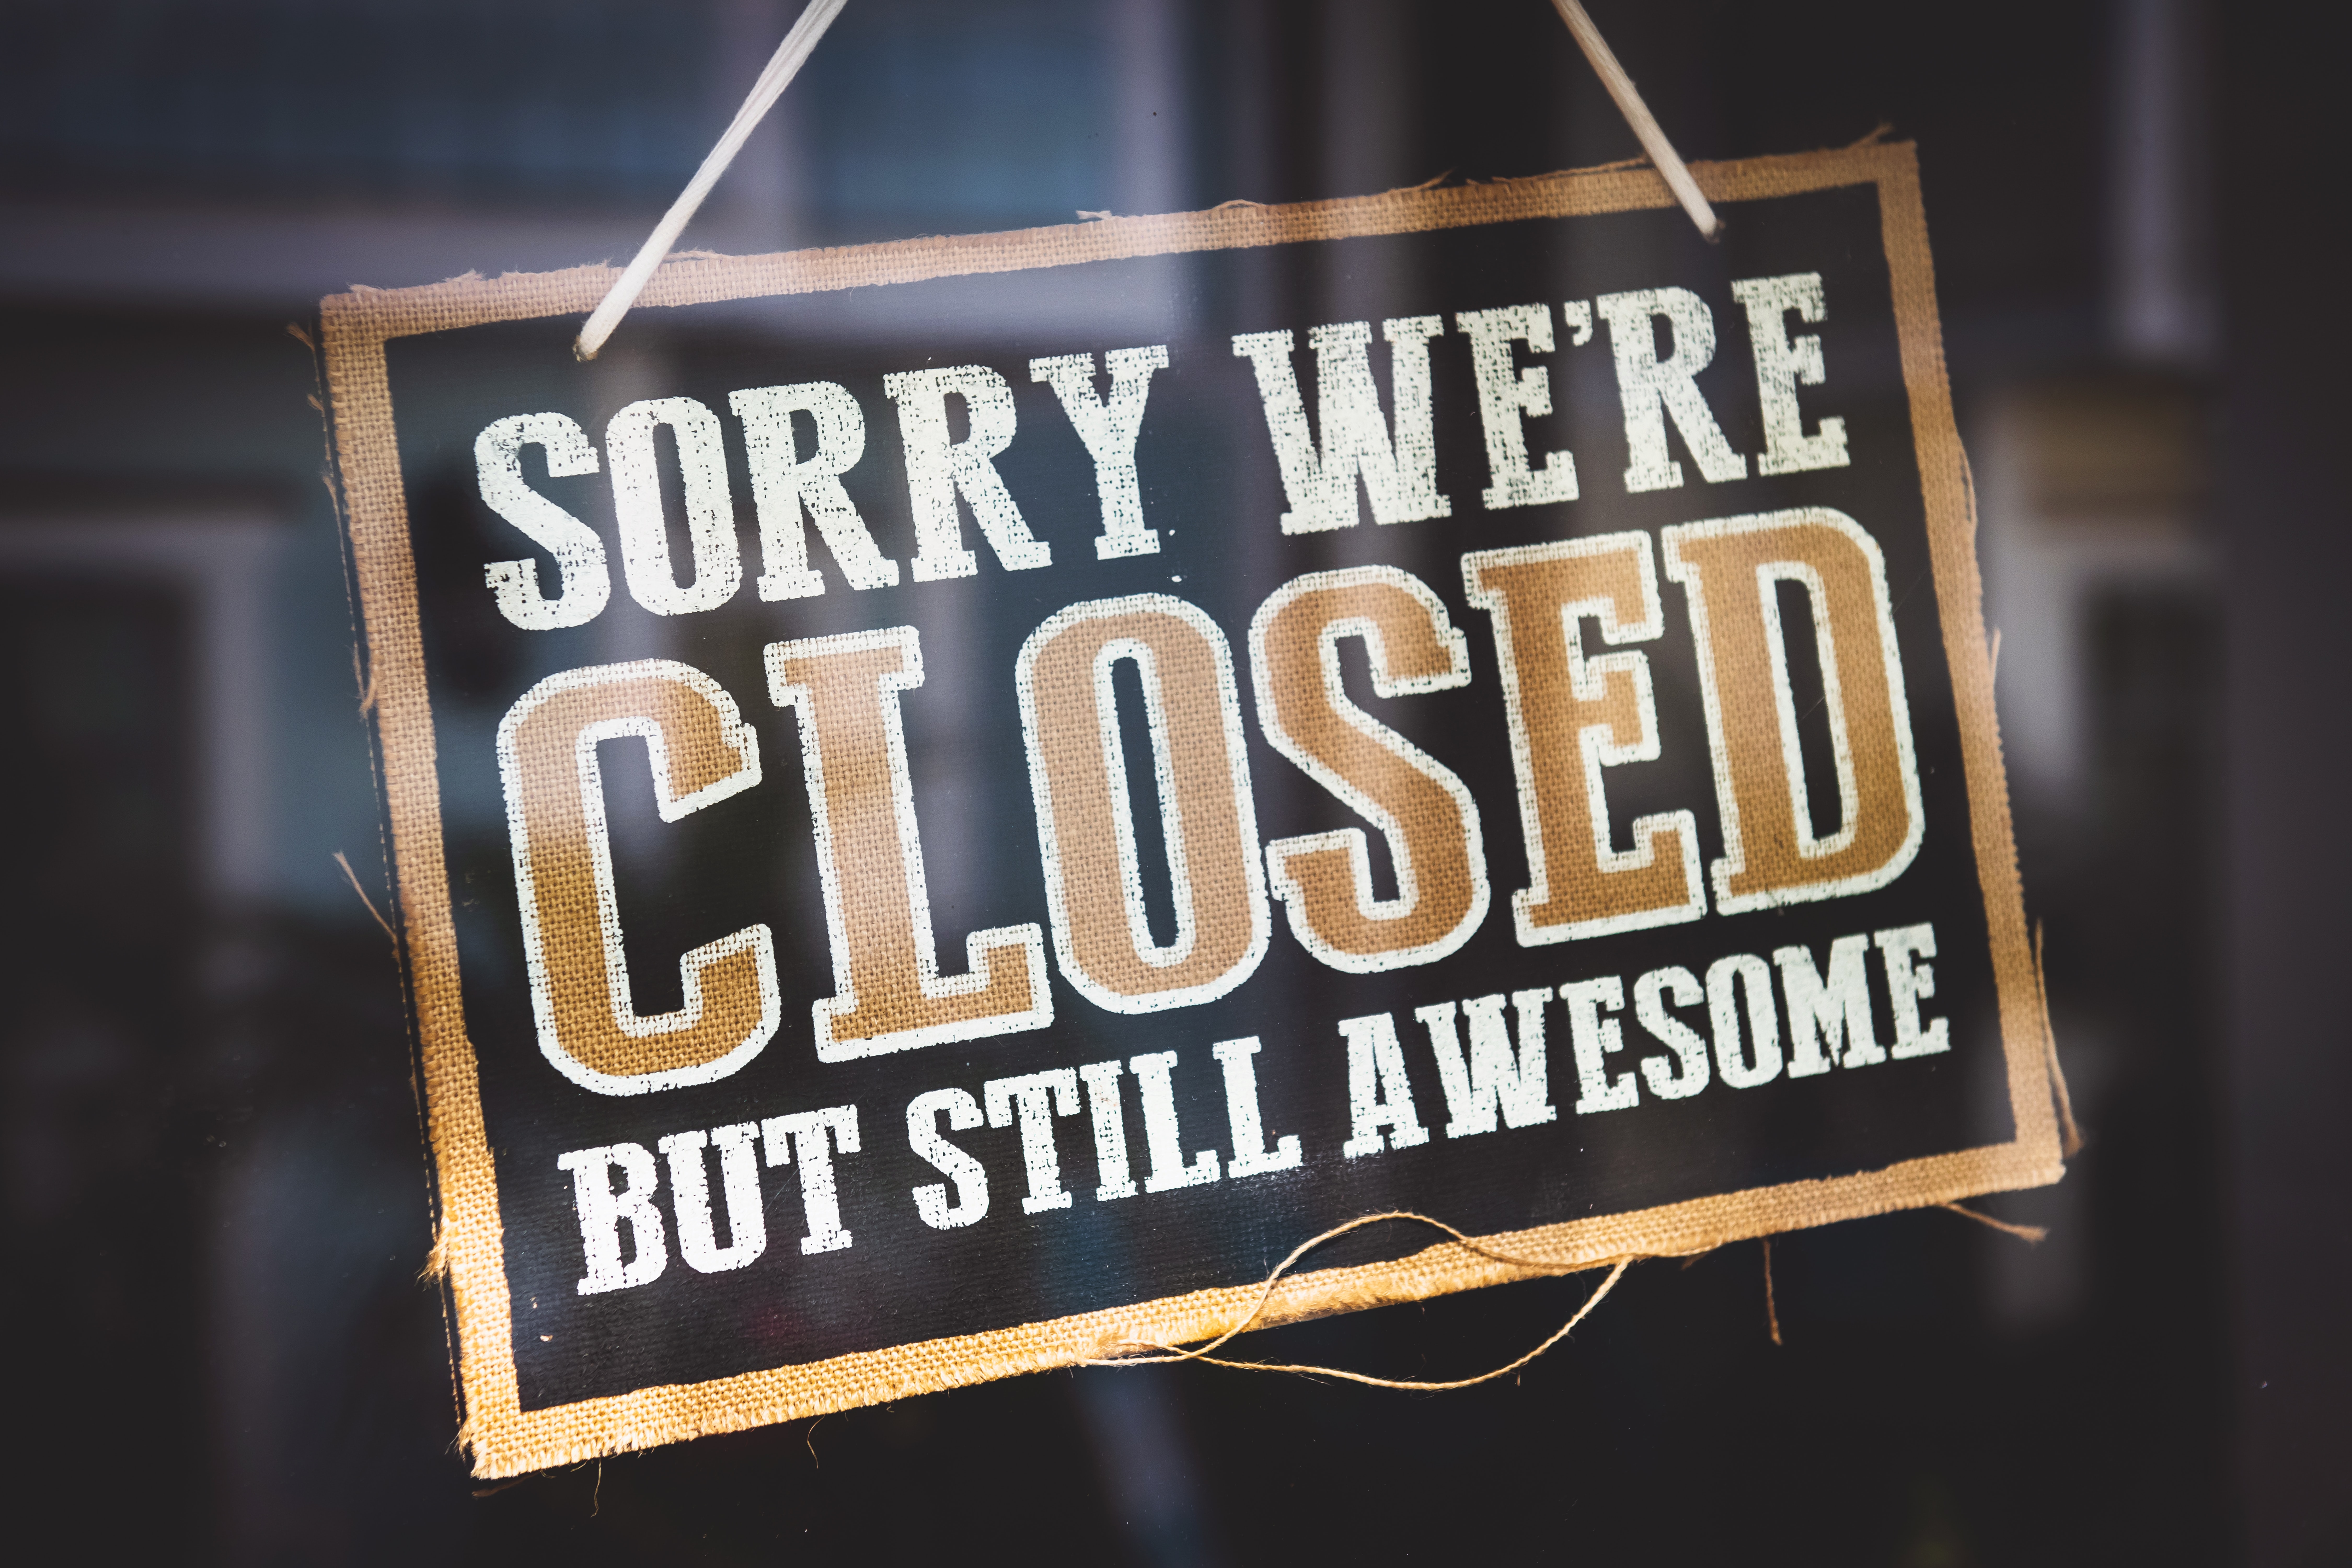 Sorry, we are closed!